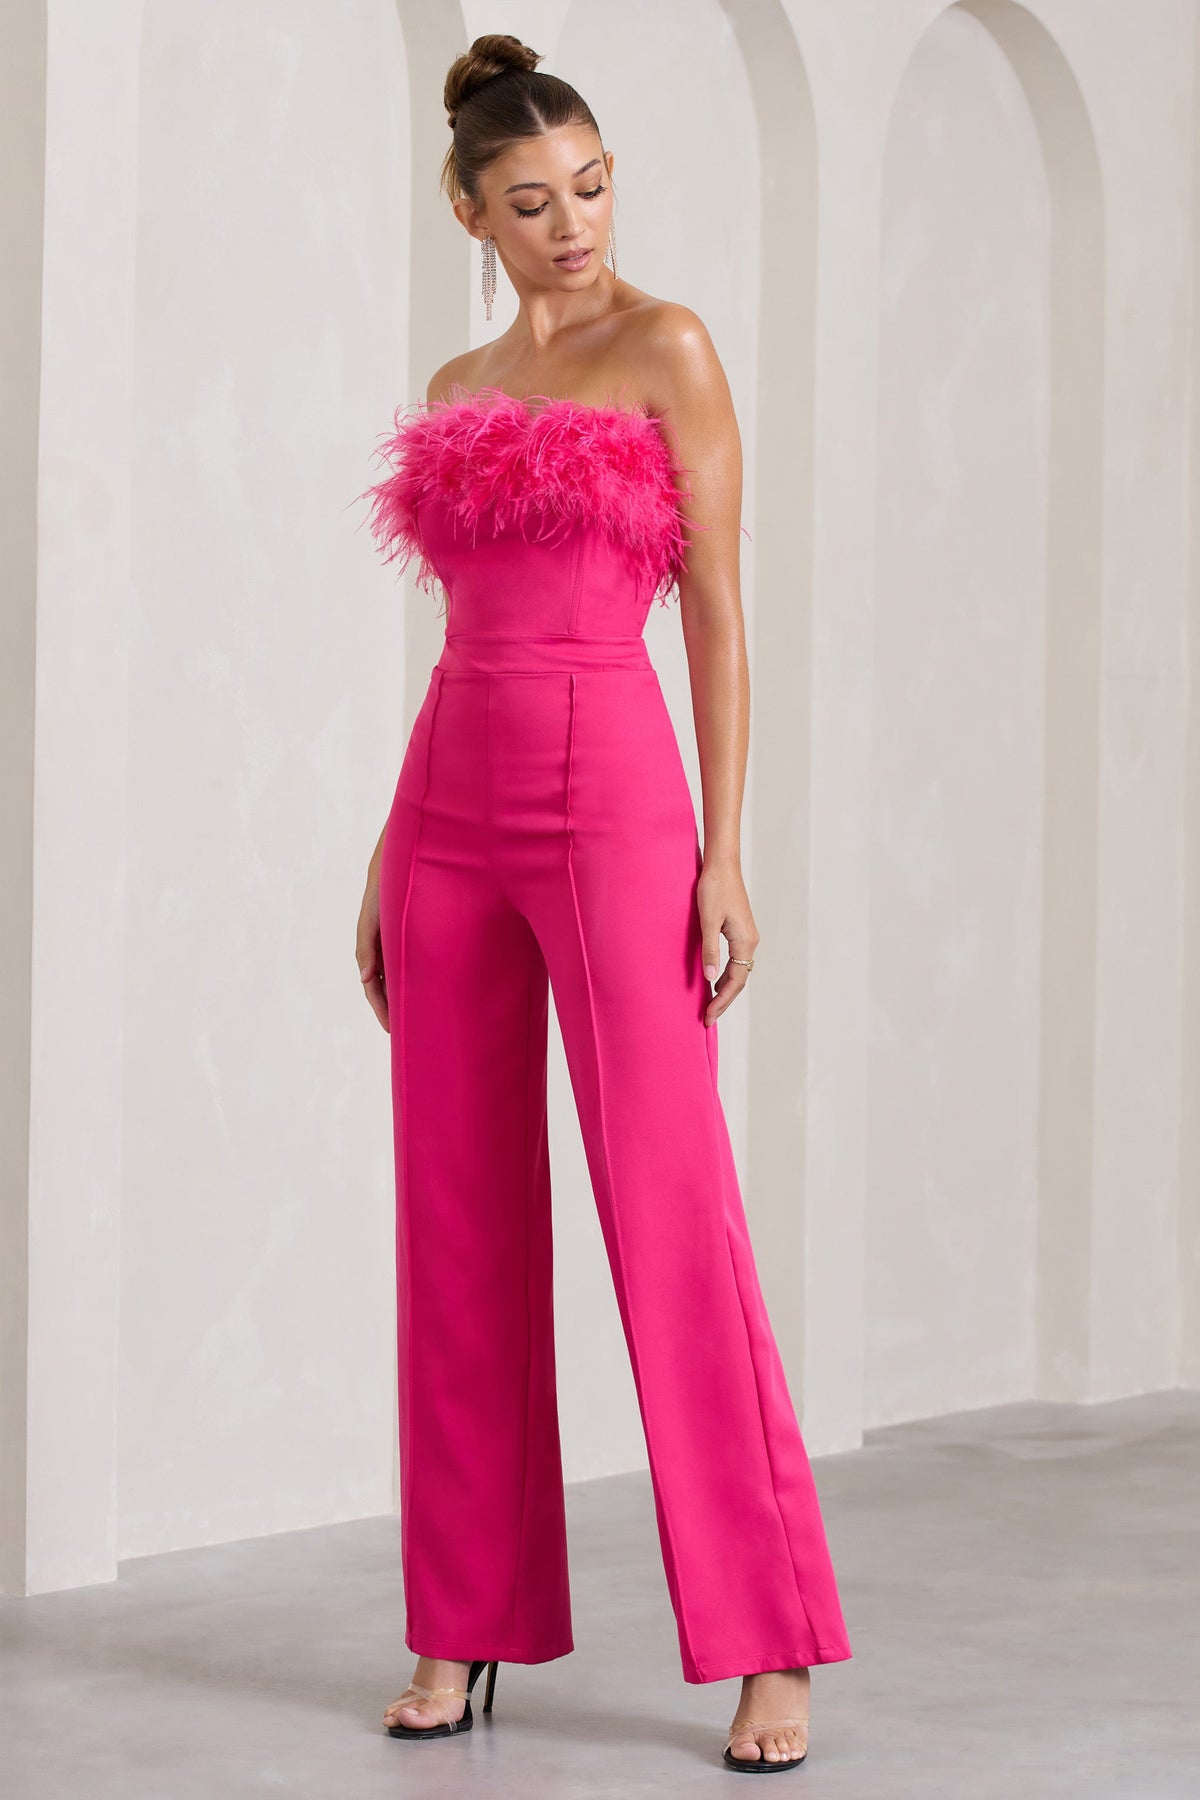 Hot Pink Feathers Jumpsuits for Women,birthday Party Dress,alternative  Wedding Dress,jumpsuit Formal Plus Size Wedding,wide Leg Jumpsuit - Etsy  Norway